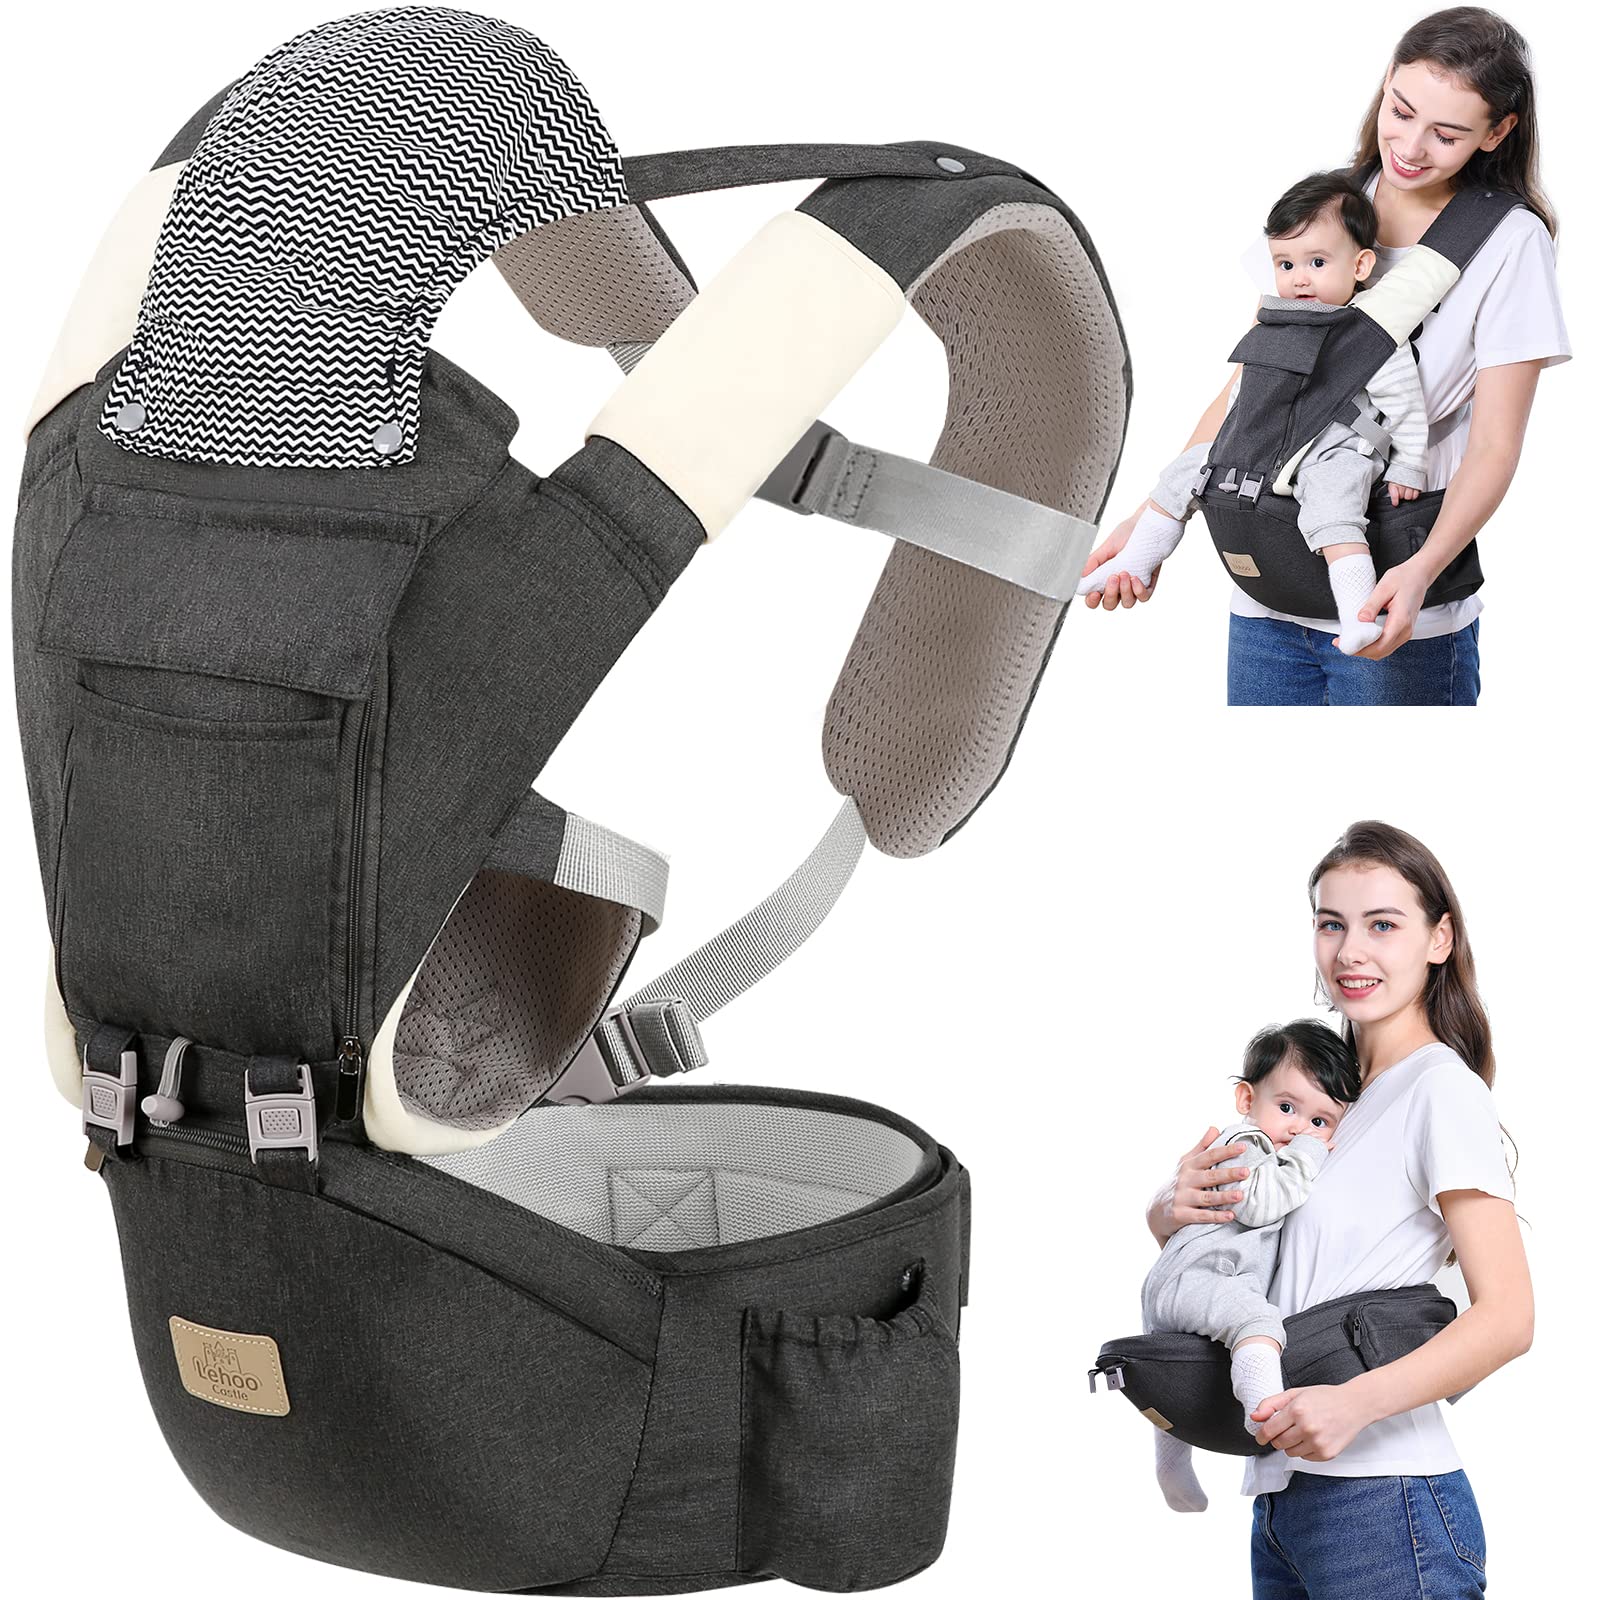 Lehoo Castle Baby Carrier with Hip Seat, 6-in-1 Baby Carrier Newborn to  Toddler, Carriers Fits All Seasons & Positions - Adapt to Newborn, Infant &  Toddler (Grey)